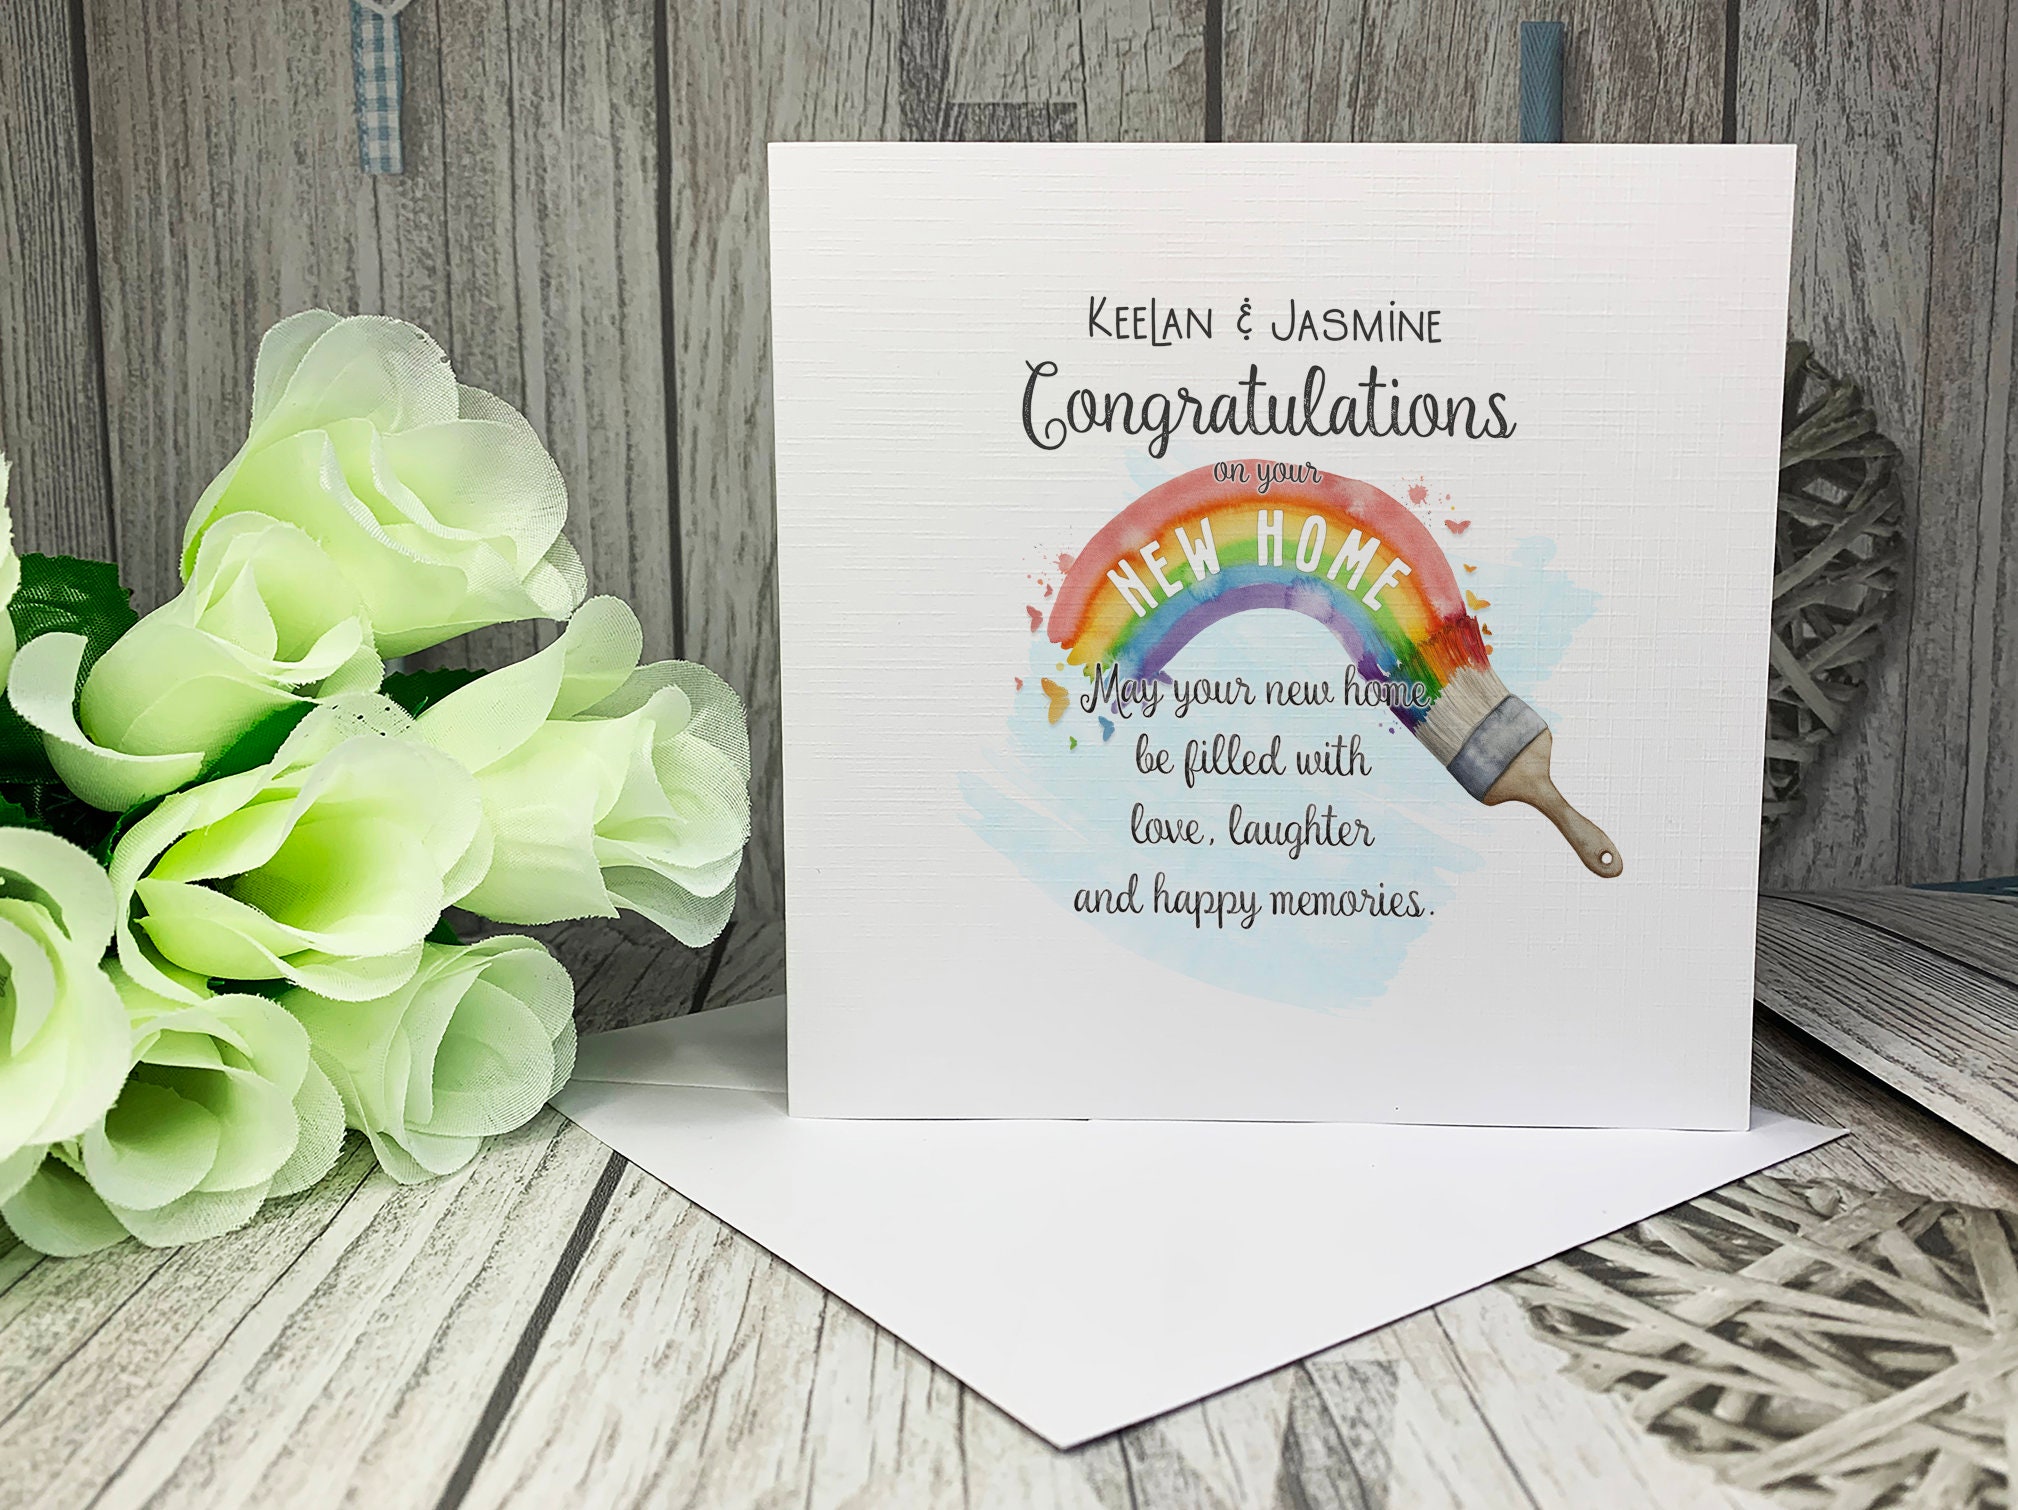 New Home personalised congratulations memory card established 2021 • new house • 6x6 inch square card • beautiful linen quality cardstock •